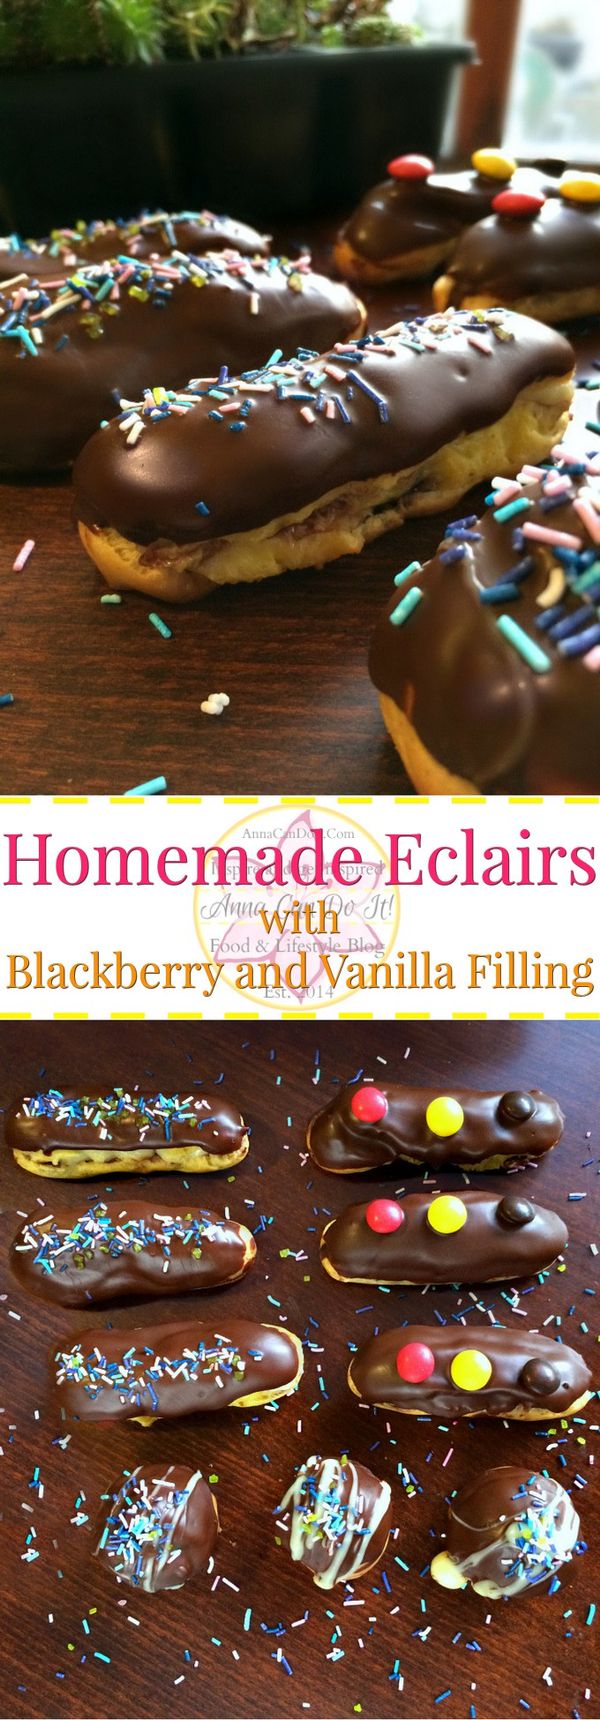 Homemade Eclairs with Blackberry and Vanilla Filling